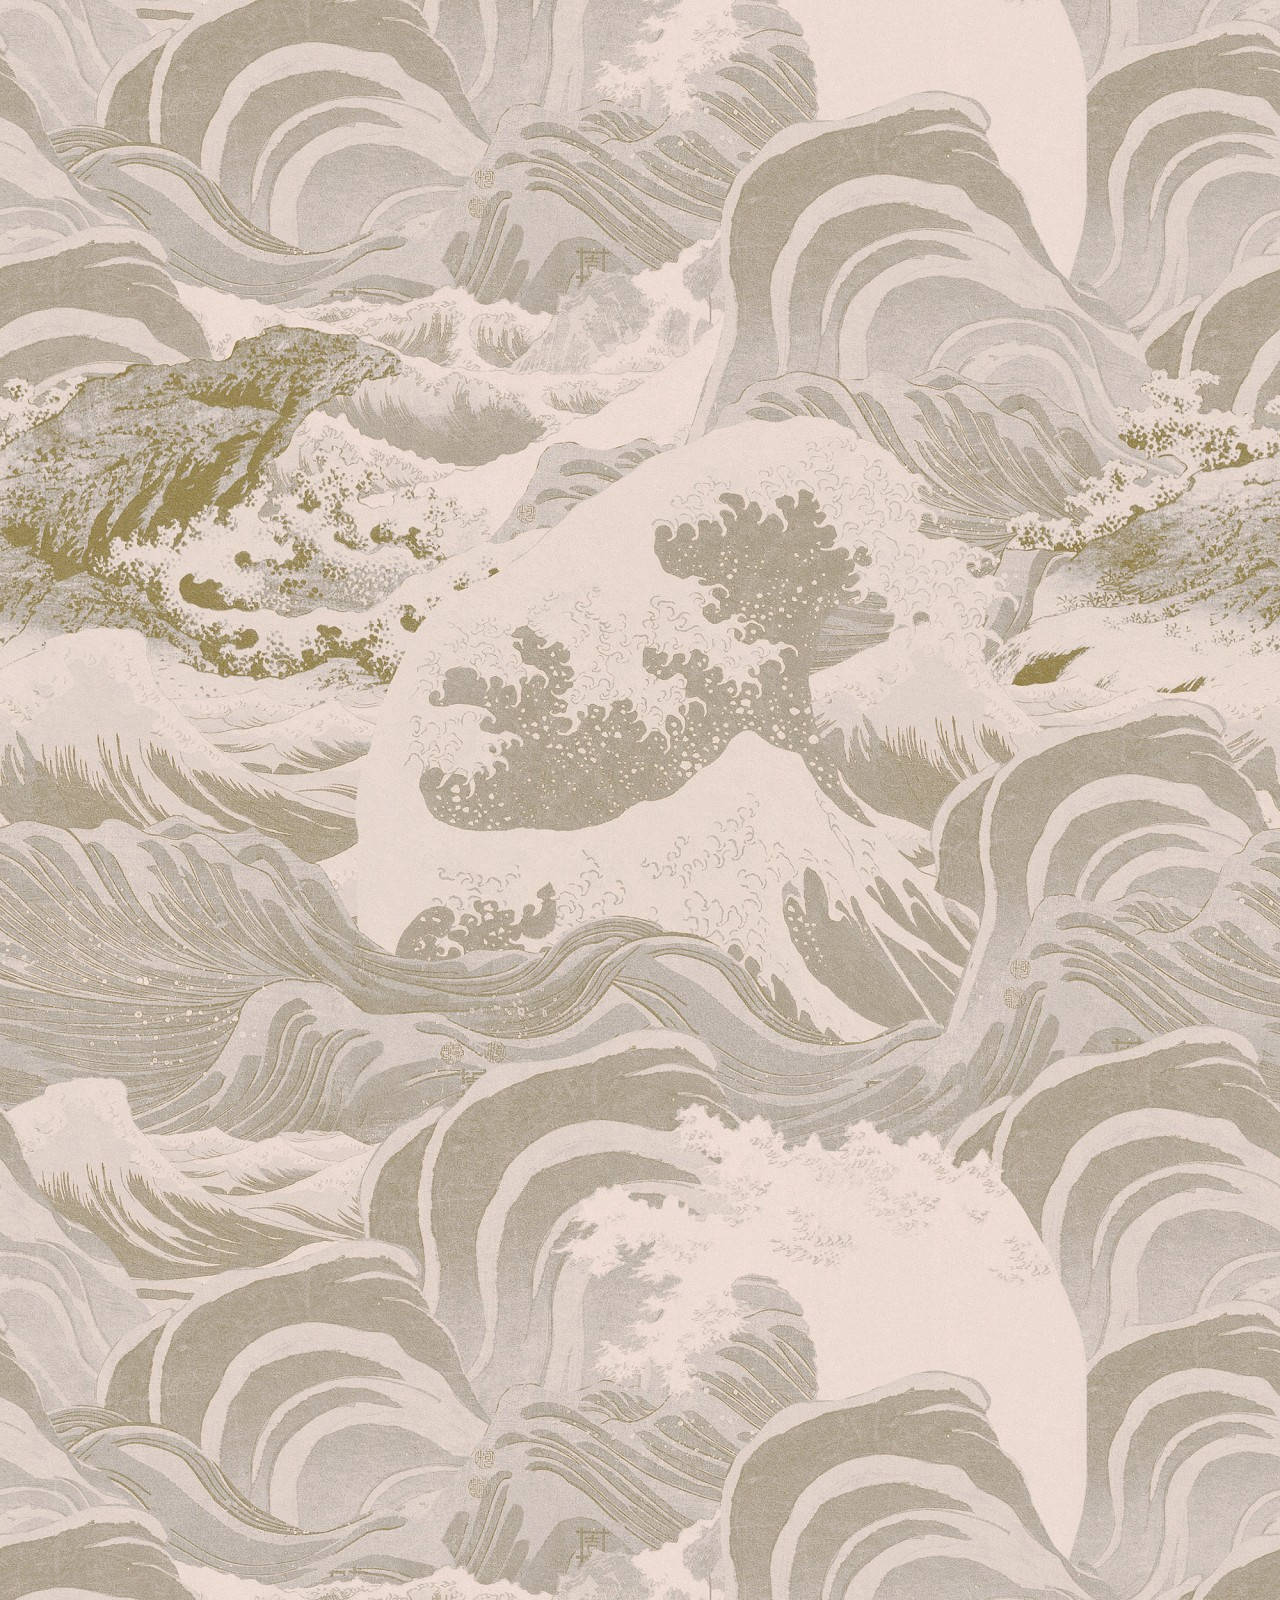 Neutral Aesthetic Iphone Wallpaper Featuring Ocean Wave And Mountain Art.